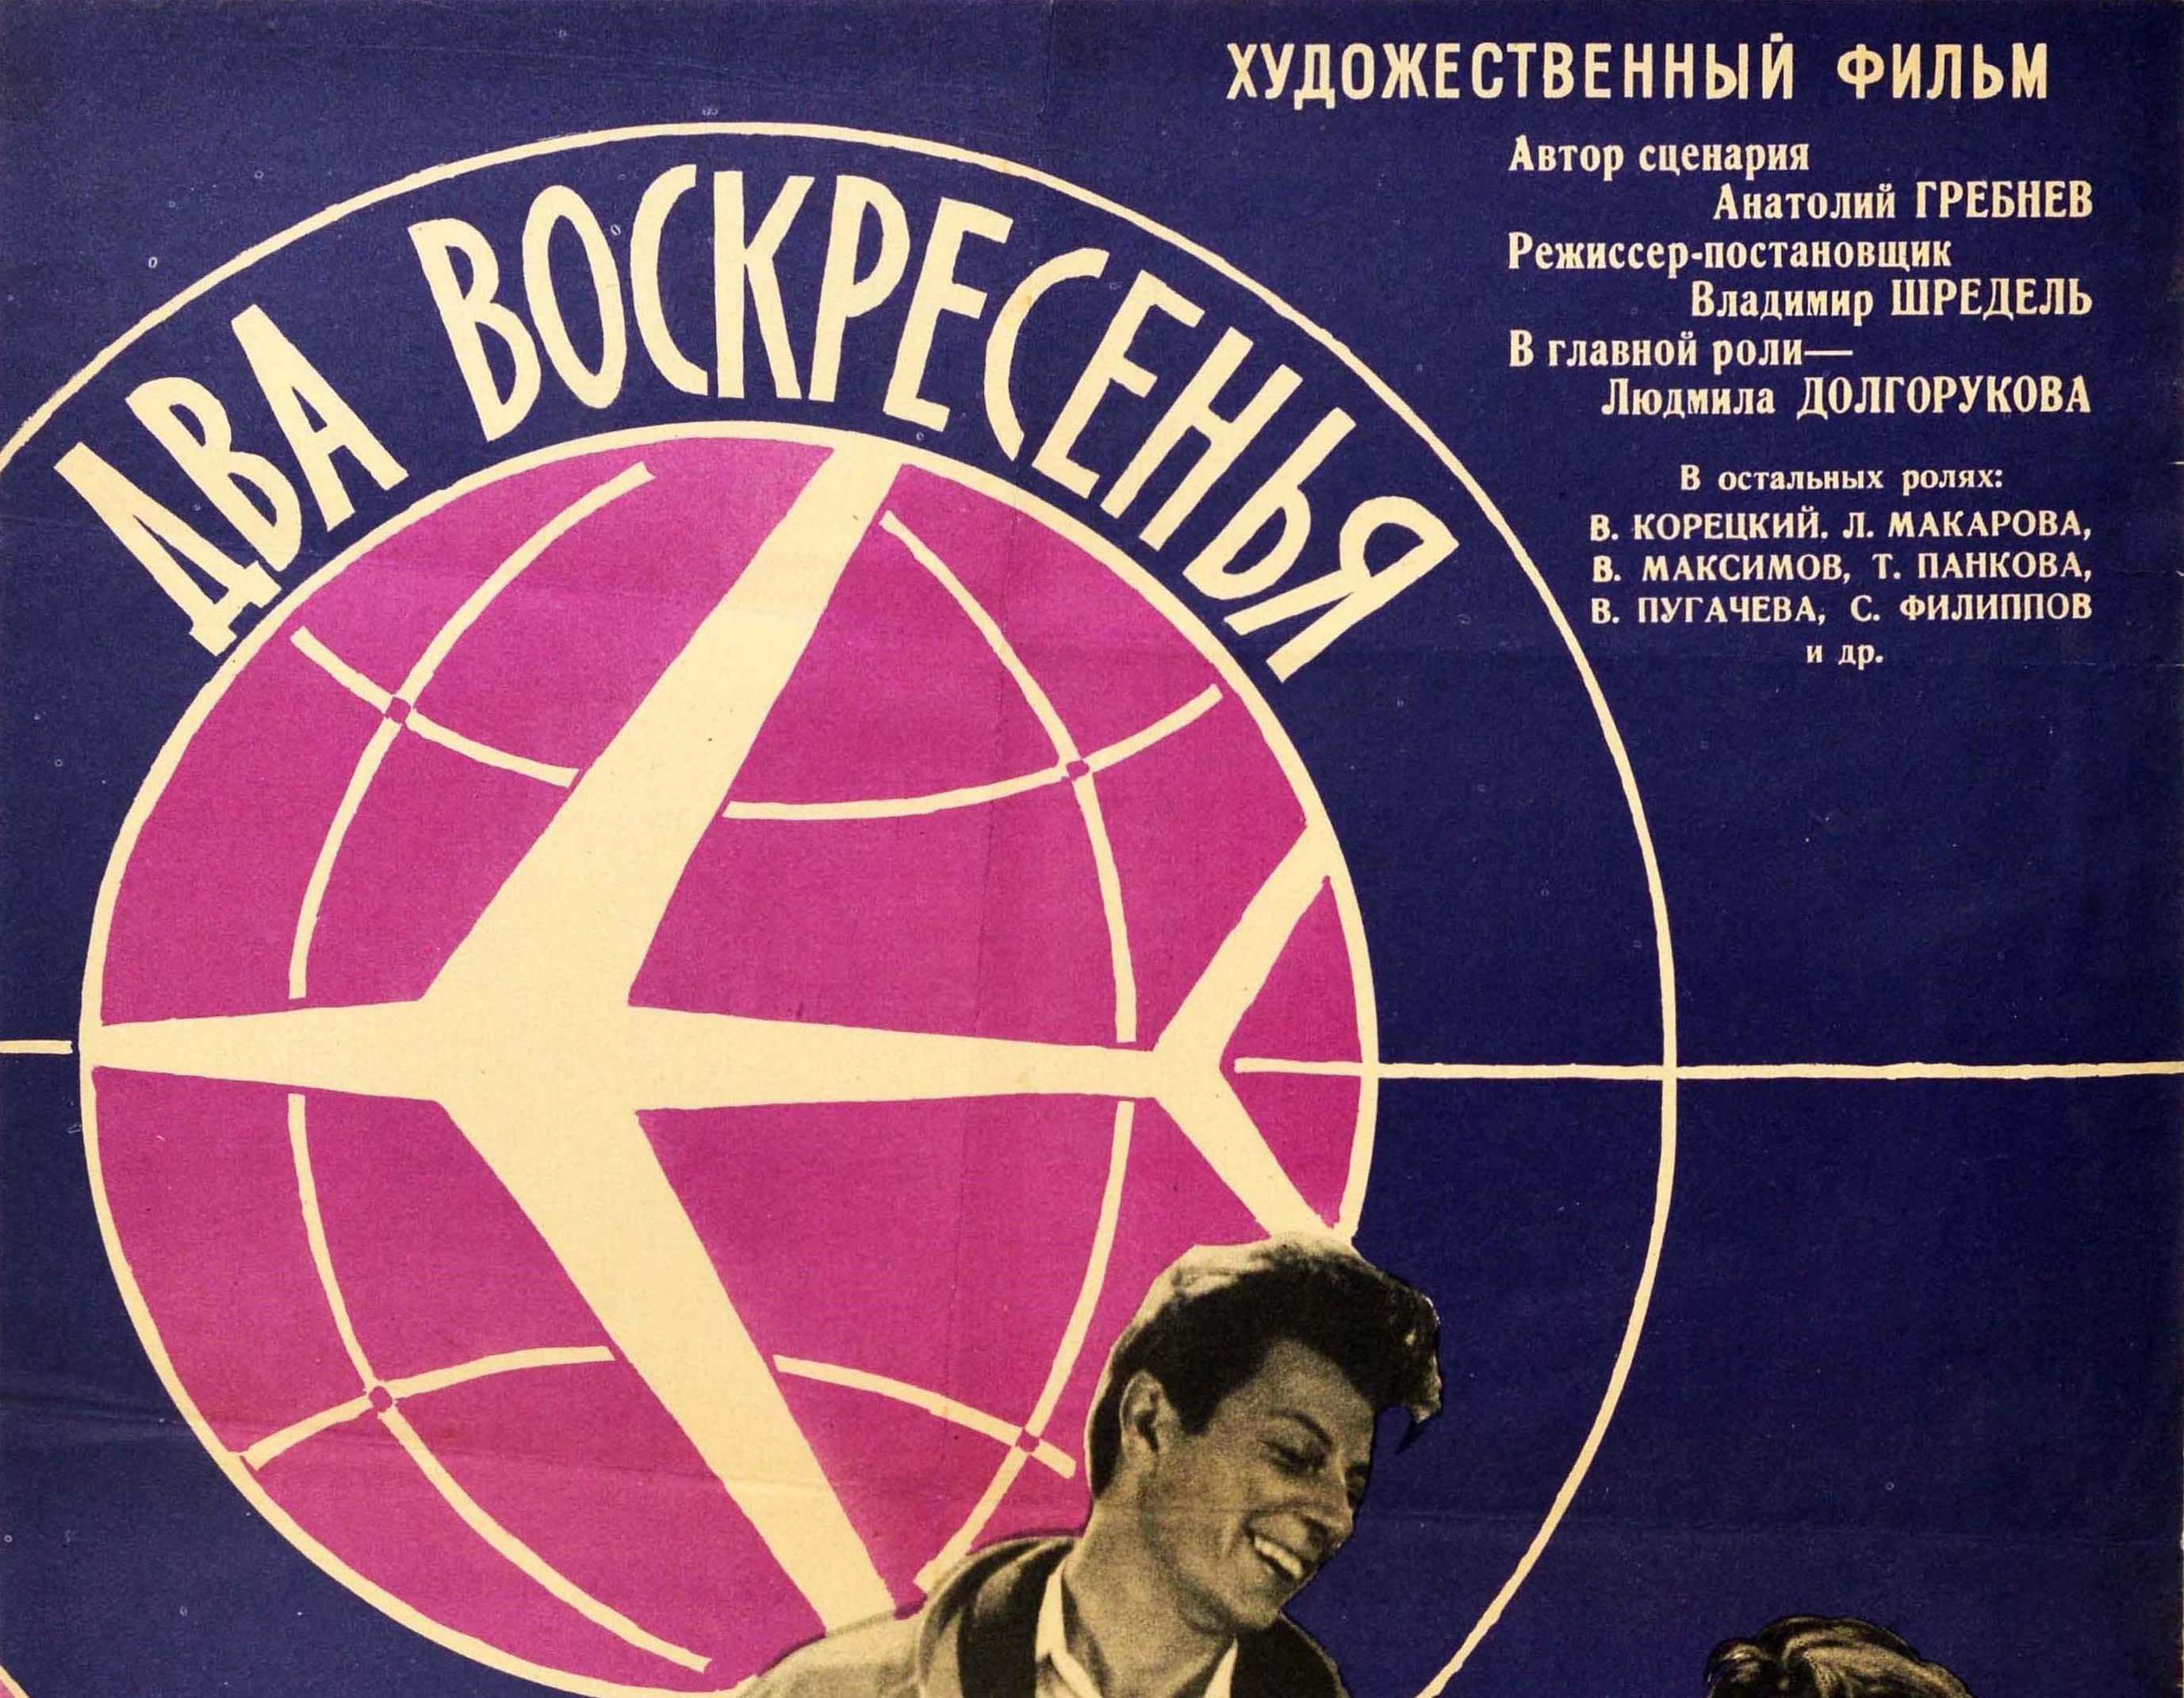 Original vintage movie poster for a 1963 Soviet drama ??? ??????????? / Two Sundays directed by Vladimir Shredel featuring a black and white photo from the film of the main characters, the fashionably dressed Lyusya played by Lyudmila Dolgorukova